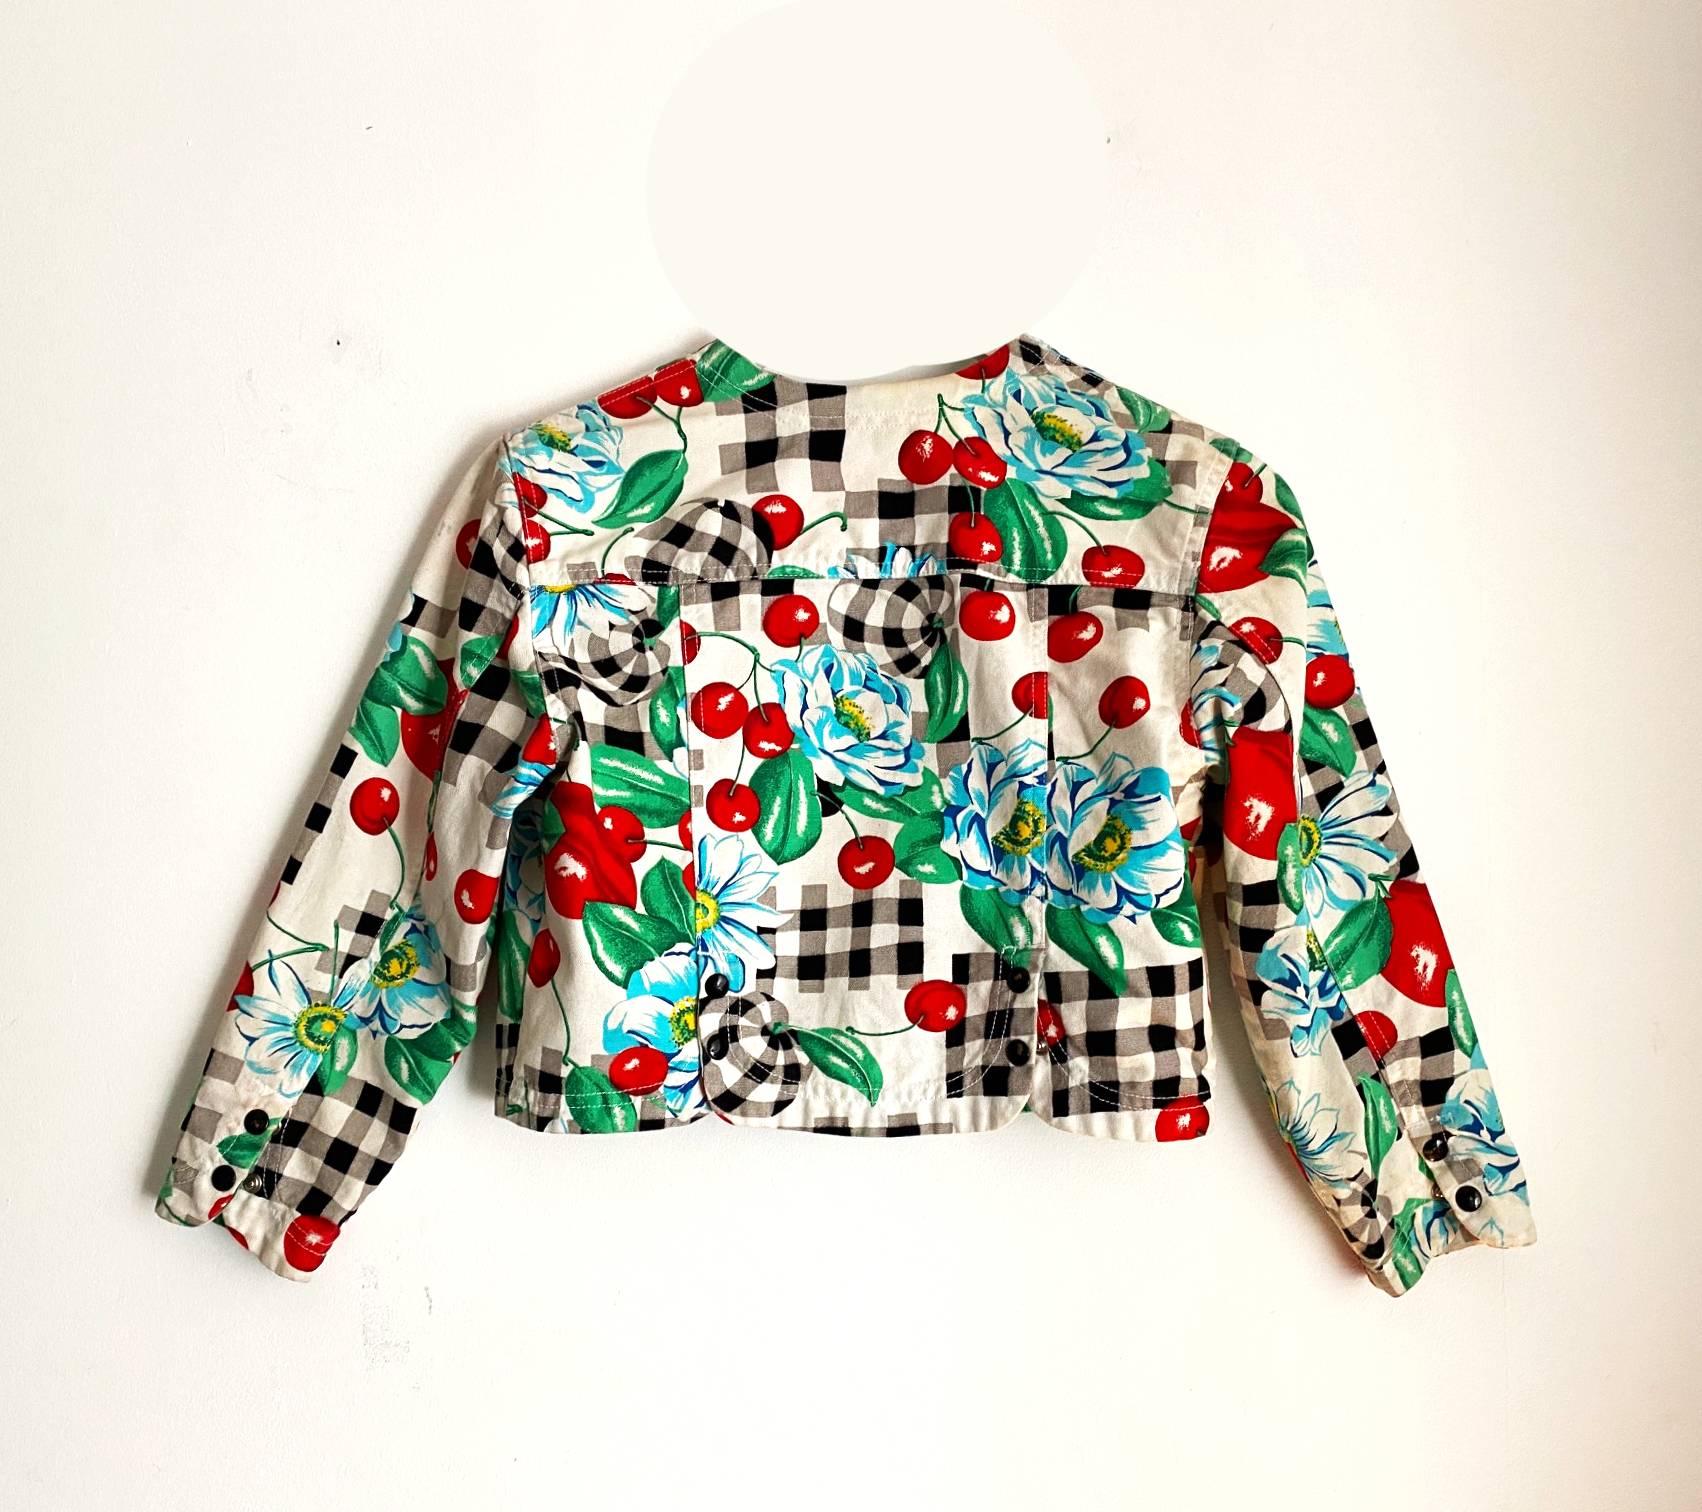 Vintage Kenzo cropped denim jacket, cherry and flower print on black and white checkered print, black prestud buttons

 Size: 38 F - 40 IT - 8 UK - 0-2 USA
Condition: 1980s, good vintage state